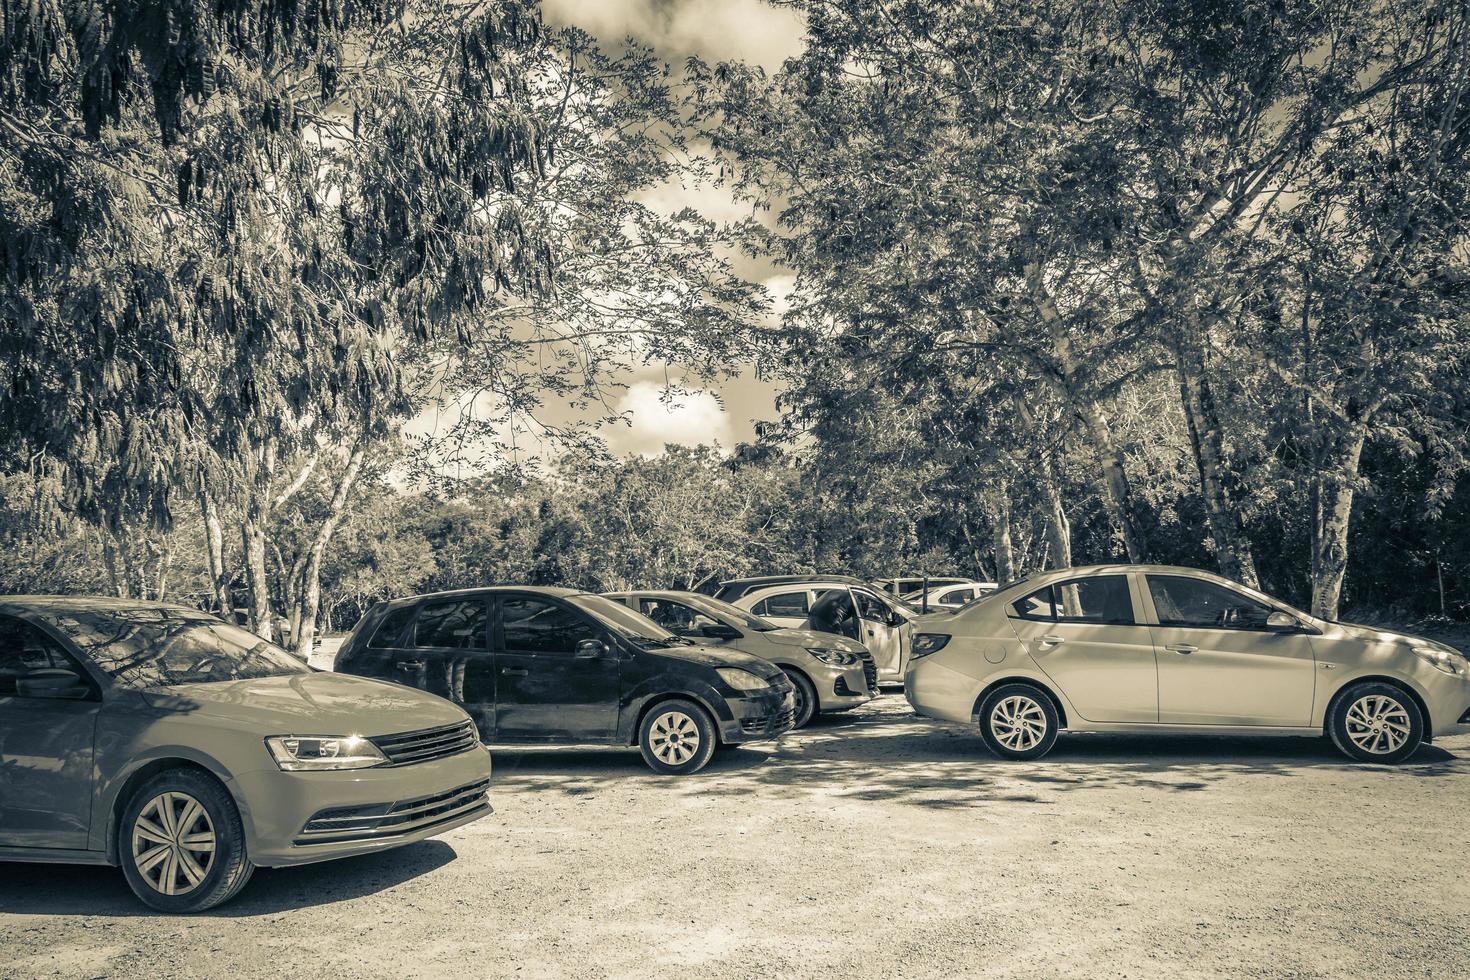 Tulum Quintana Roo Mexico 2022 Parking lot with cars jungle to Kaan Luum lagoon Mexico. photo